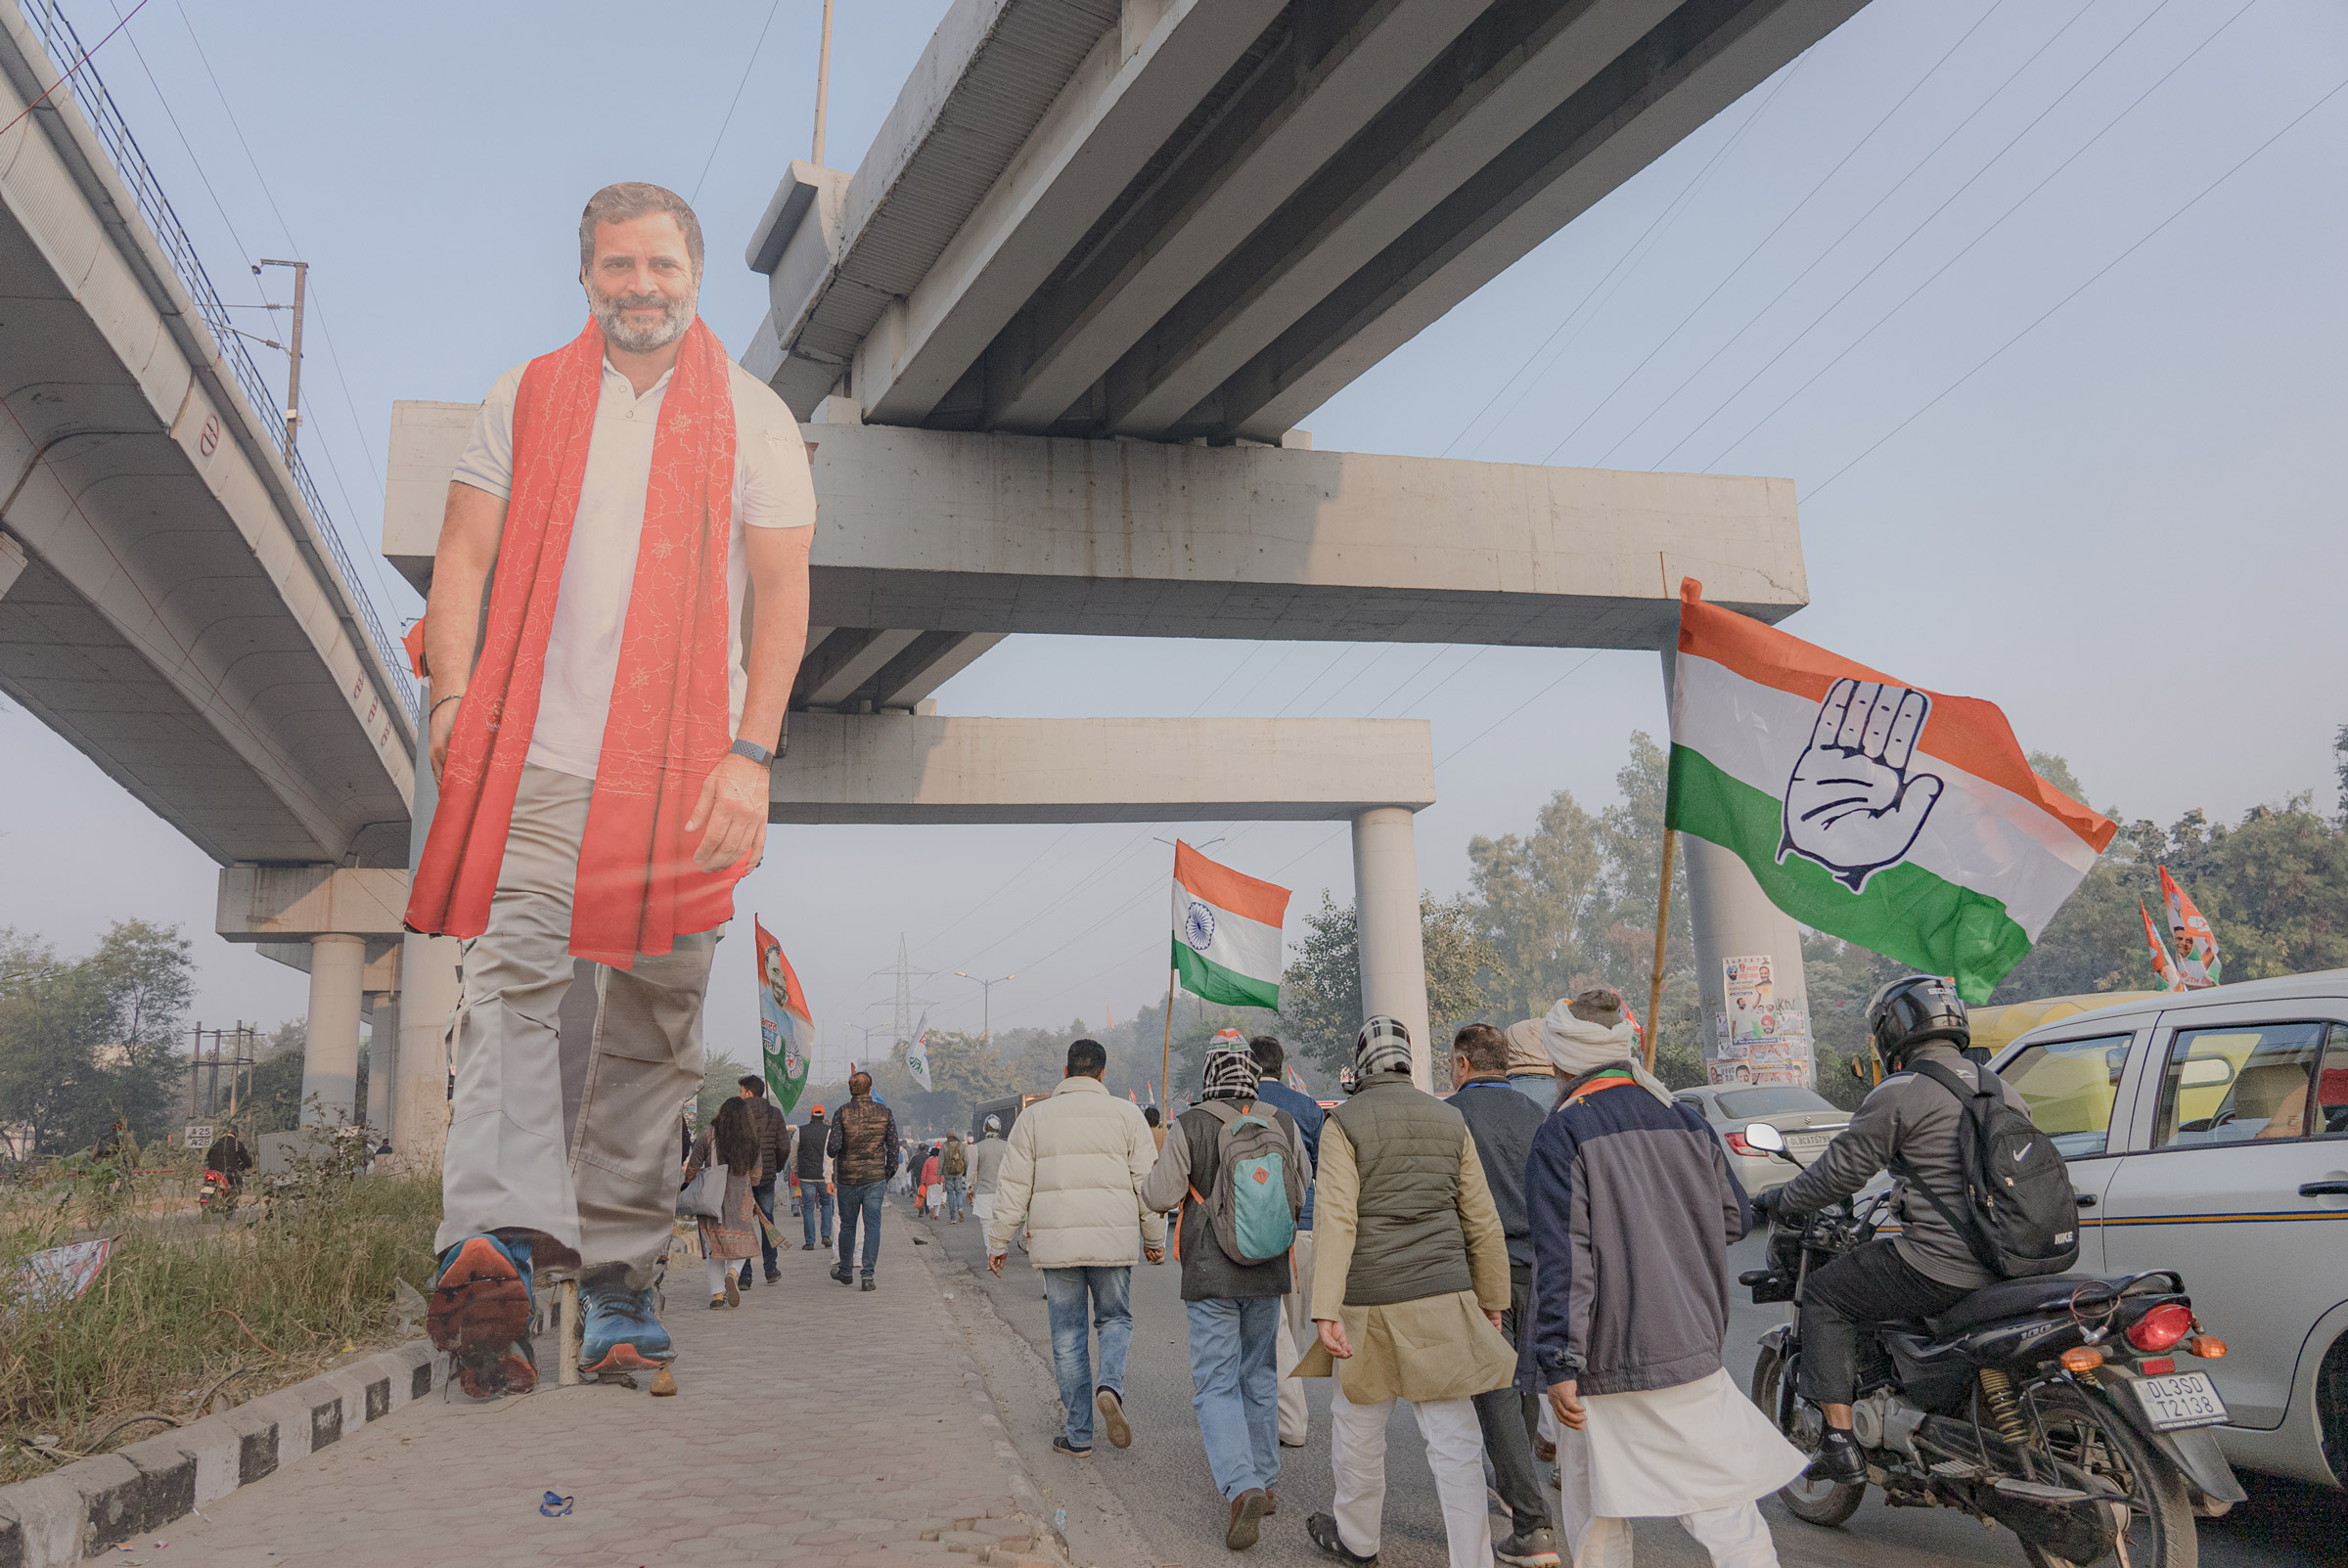 Supporters of Indian National Congress walk by a cut-out of Rahul Gandhi early in the morning to see him during the Bharat Jodo Yatra in New Delhi, India on Dec. 24, 2022. (Ronny Sen for TIME)